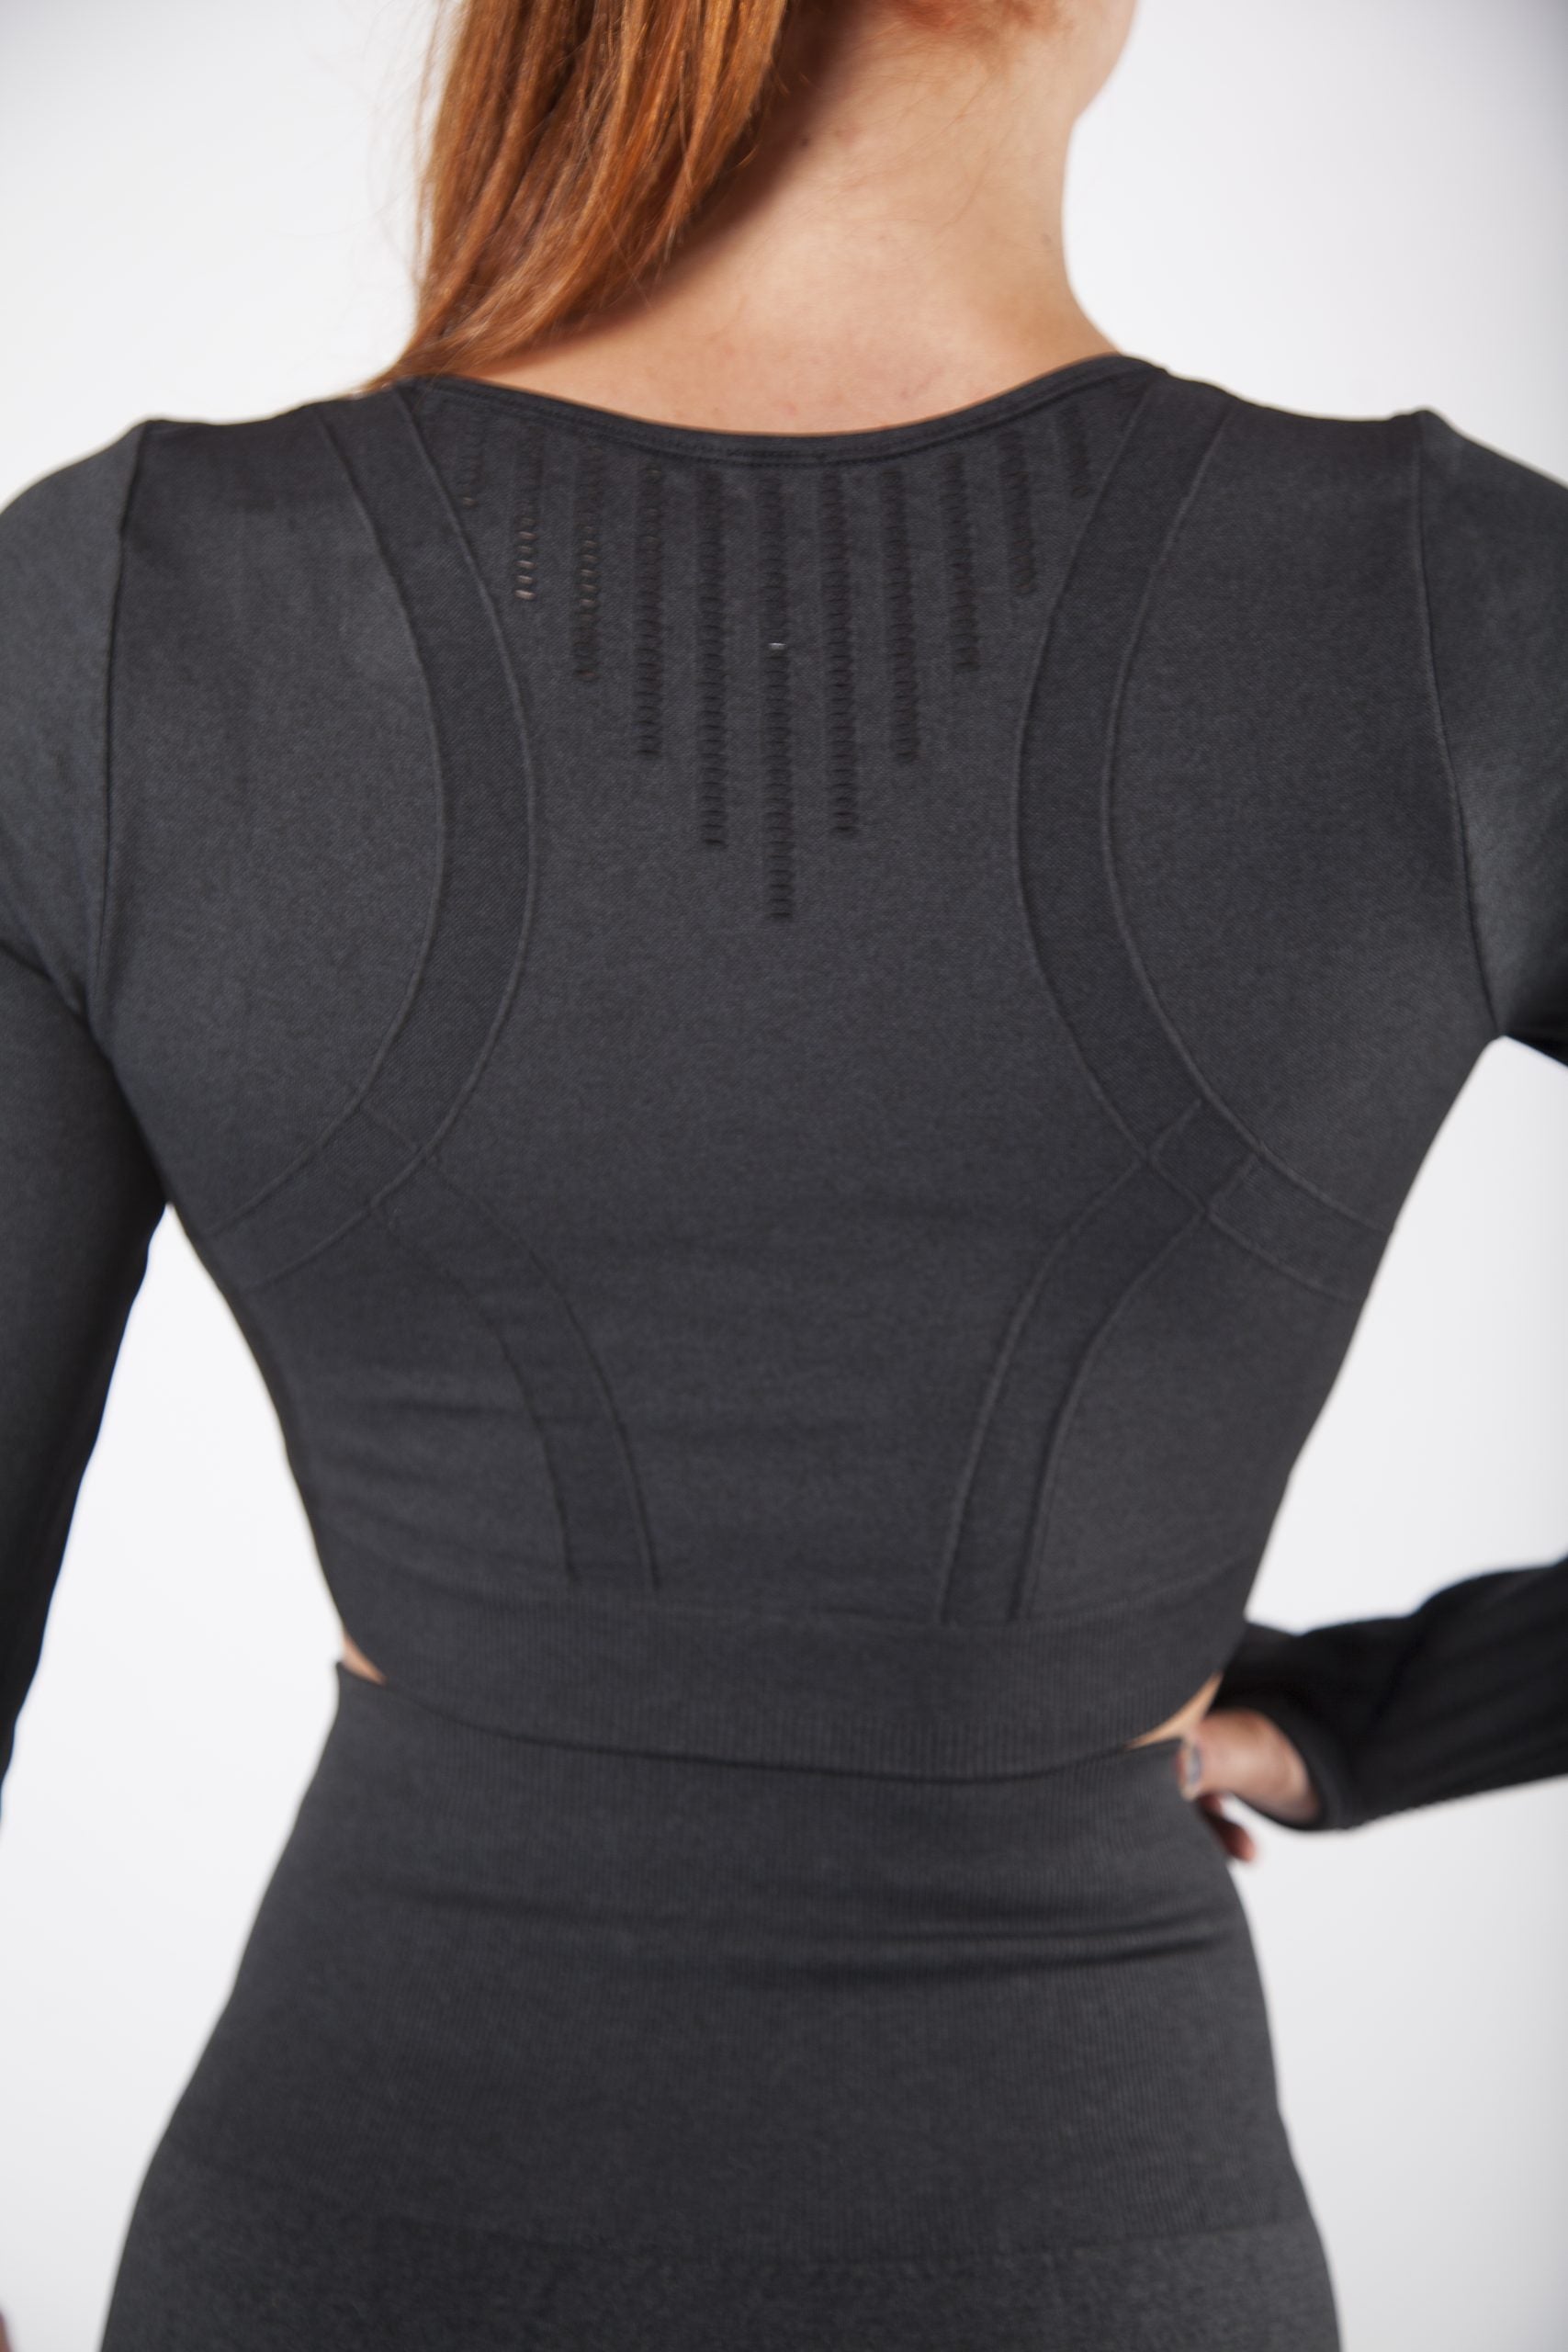 Contour Long Sleeve Crop Top in Charcoal